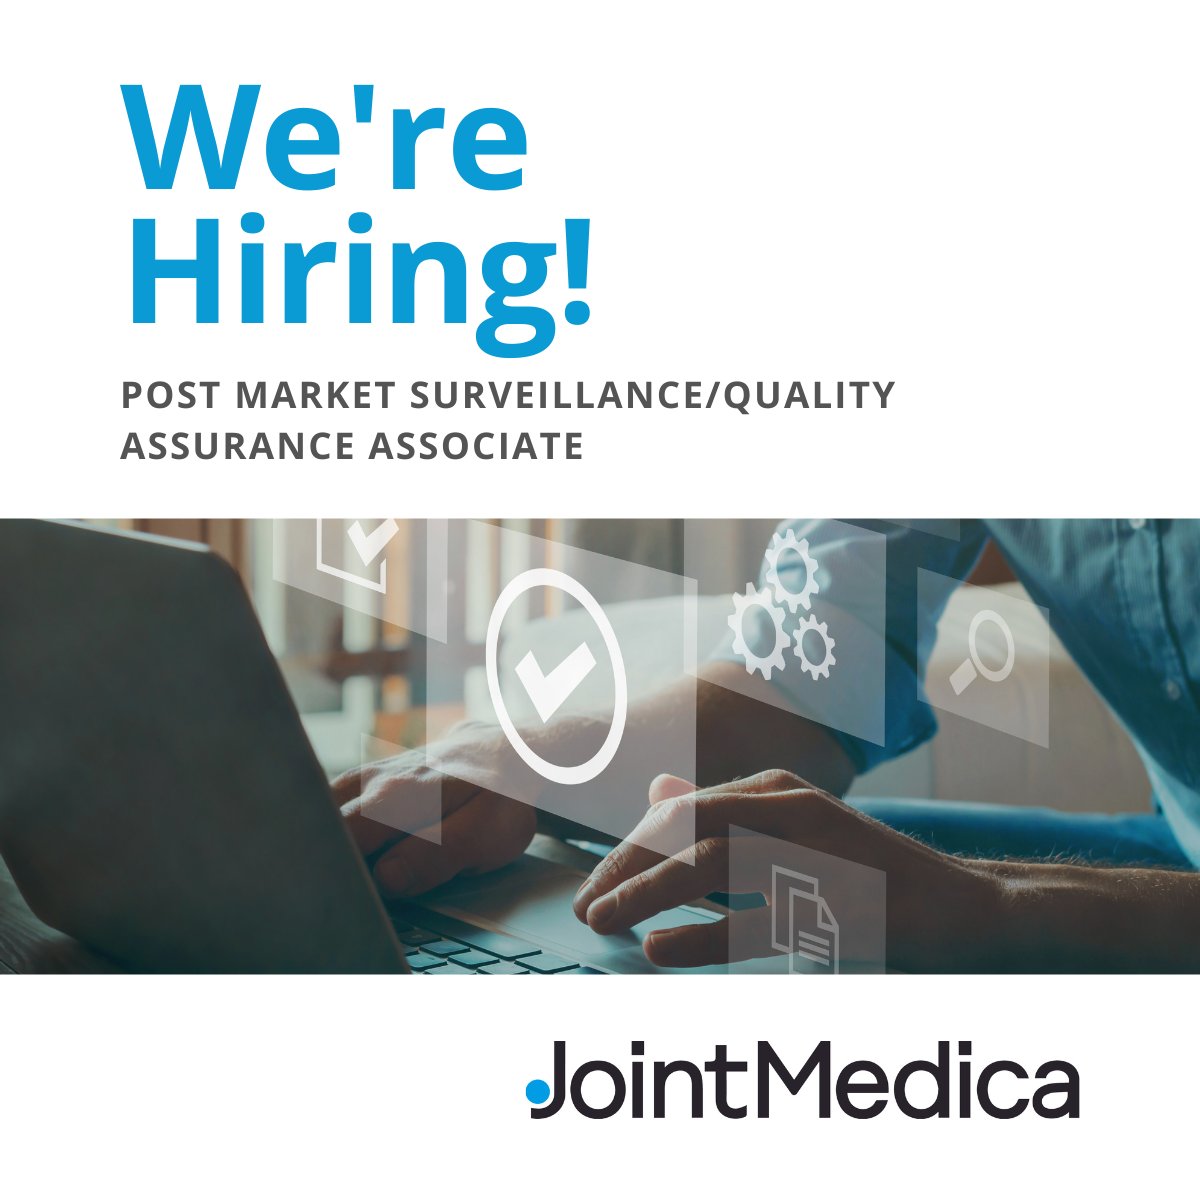 📣 Job Alert! We’re expanding our quality department and searching for a detail-oriented PMS/QA Associate to join us at our head office in Hallow, Worcestershire. As part of this role, you'll be responsible for gathering and collating clinical data to ensure compliance with